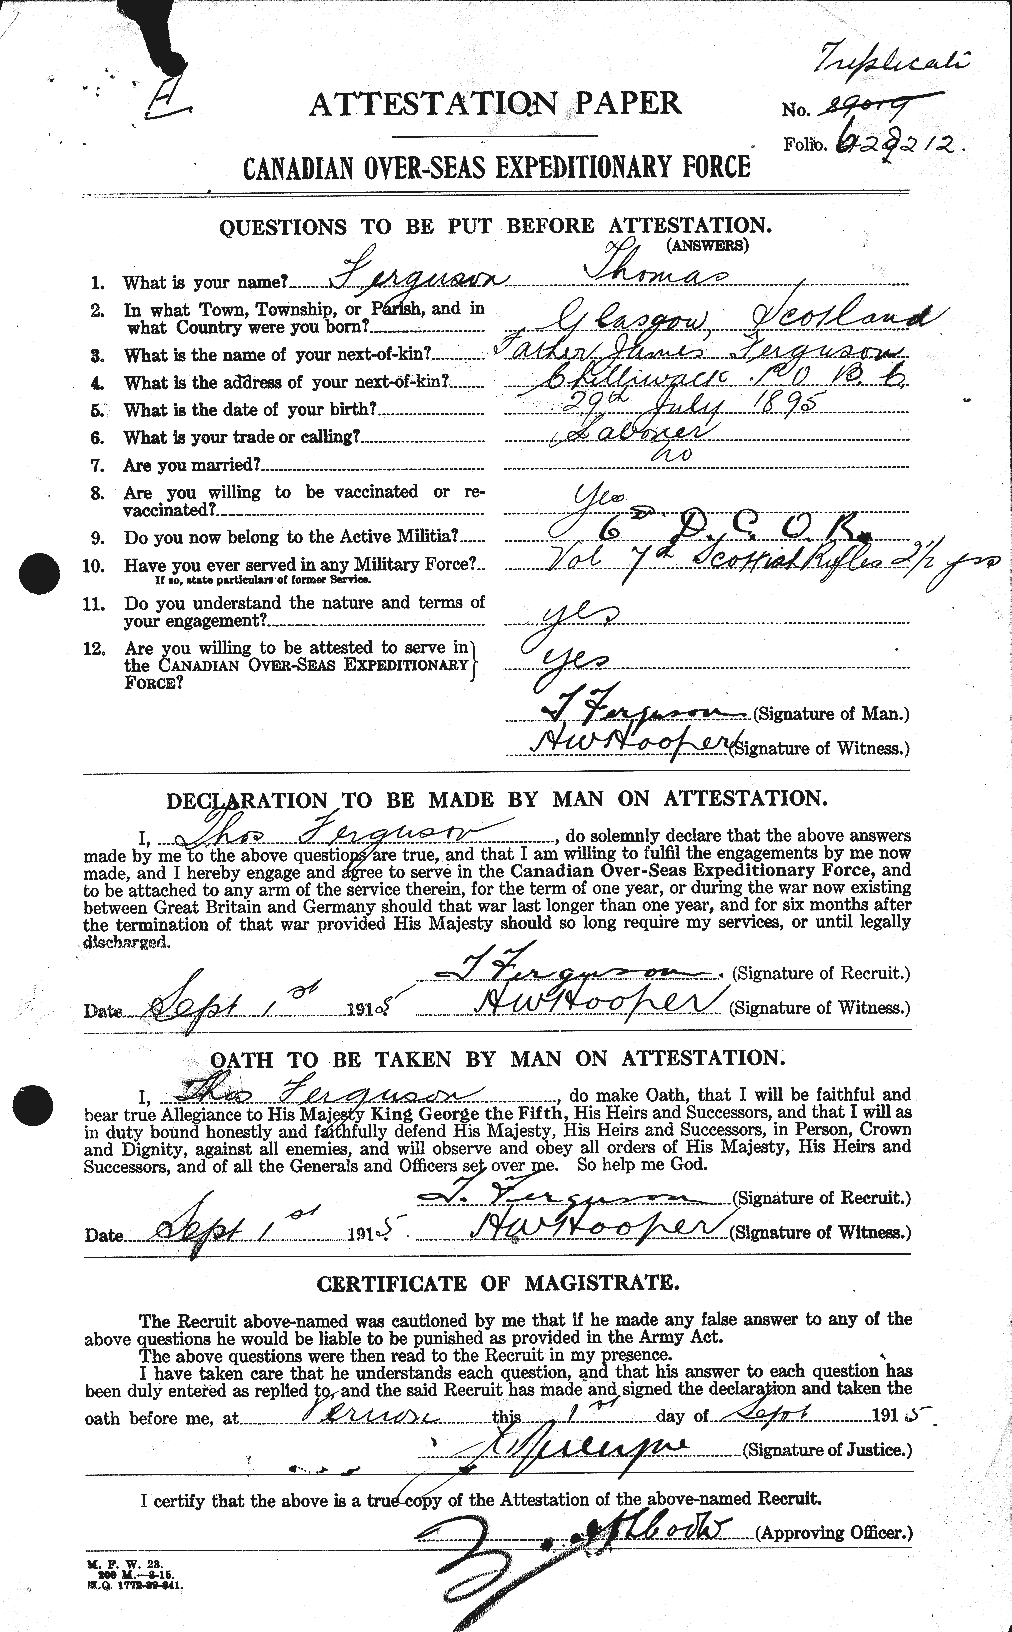 Personnel Records of the First World War - CEF 321676a